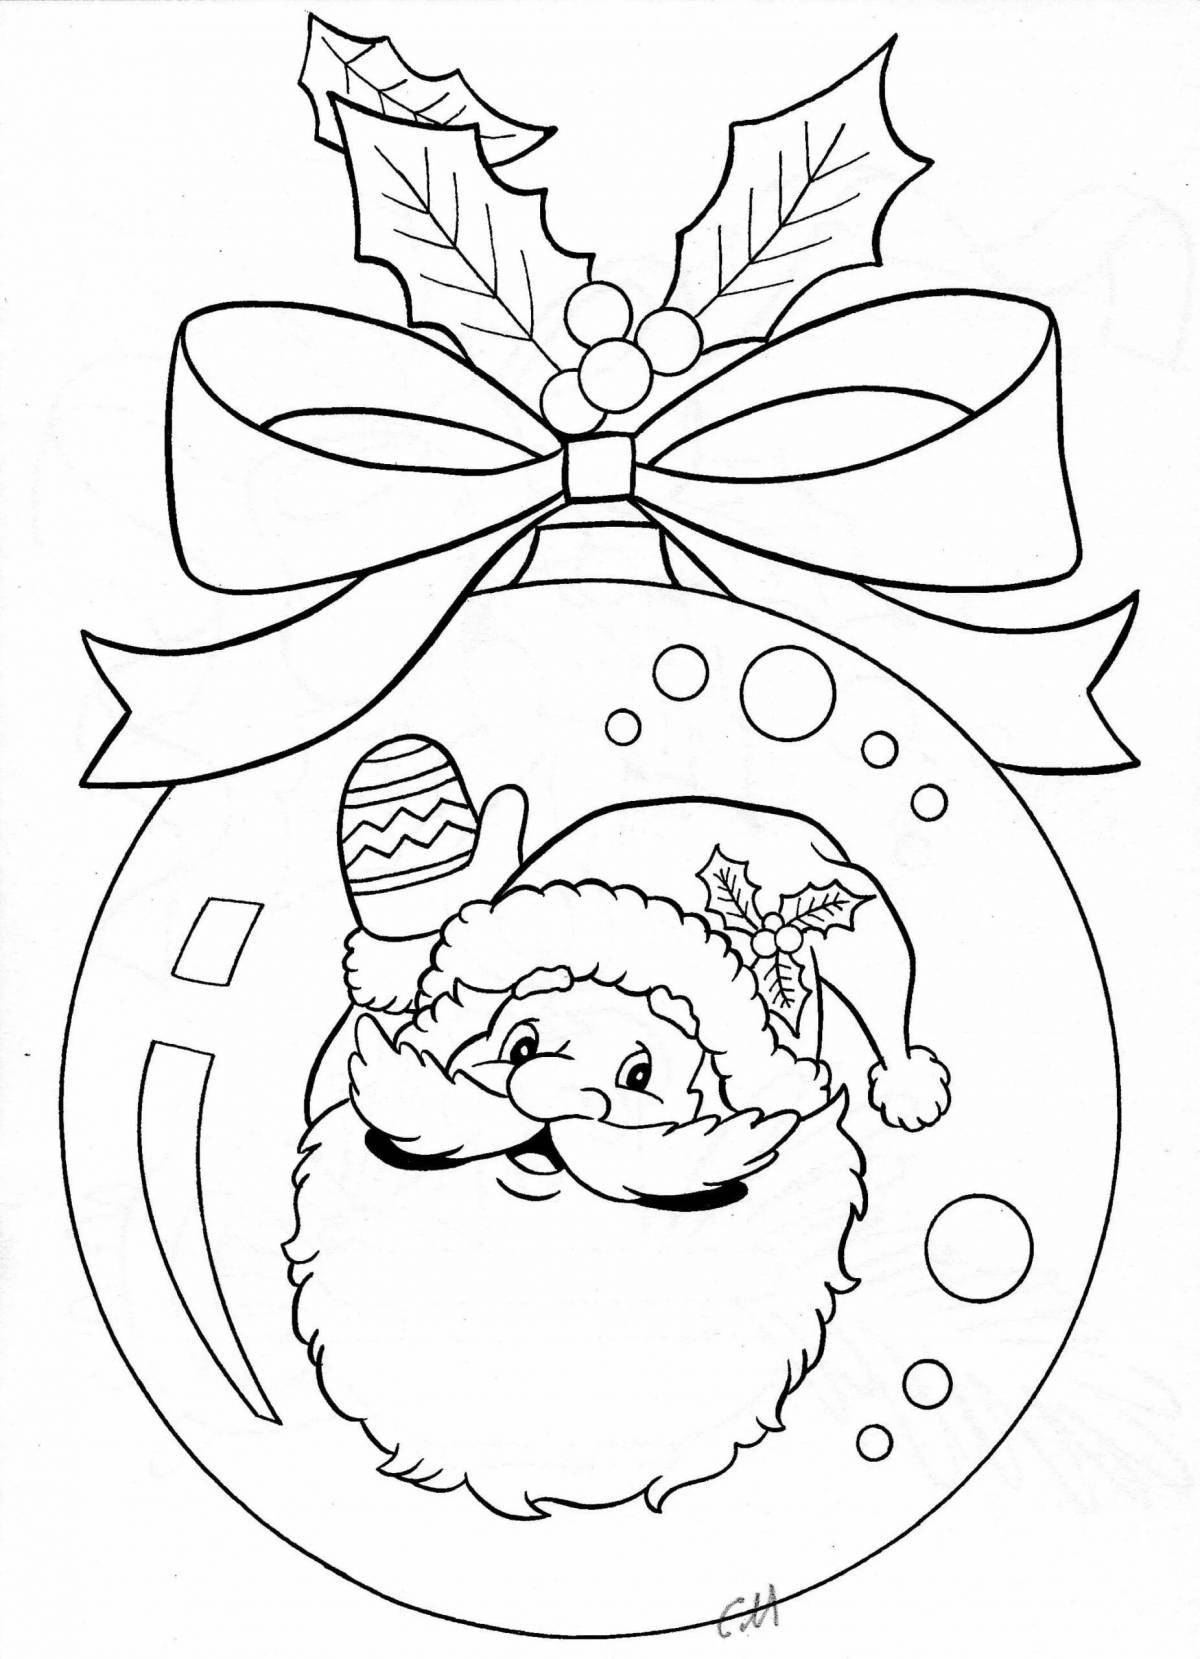 Great christmas coloring book